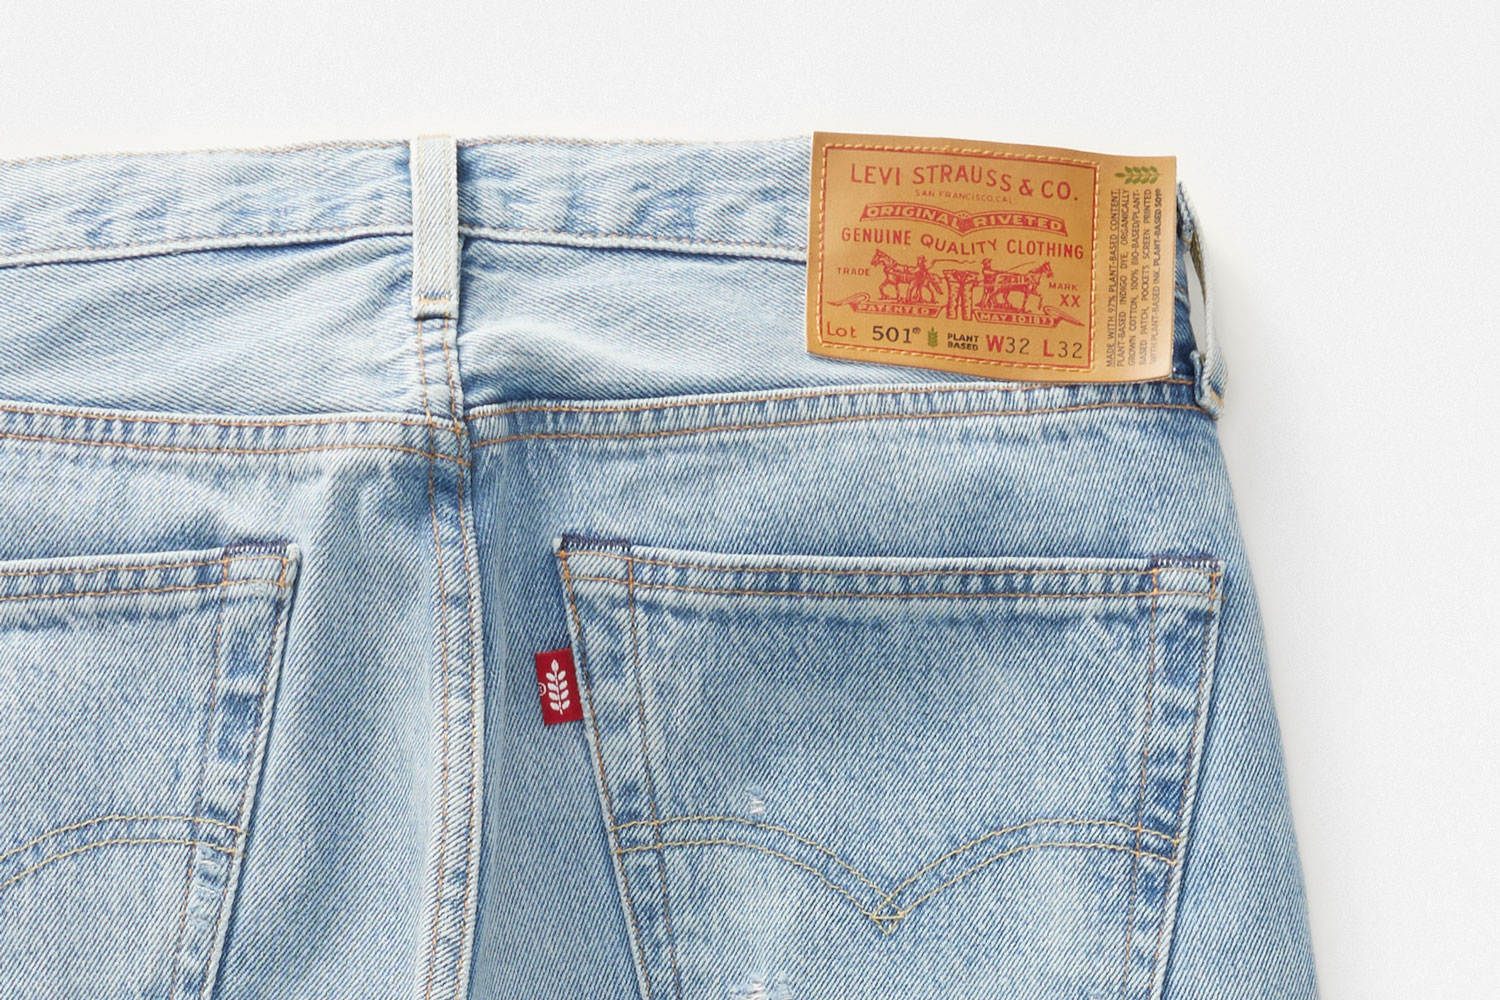 Levi's Plant-Based 501 Jeans Are the Future of Fashion | Field Mag